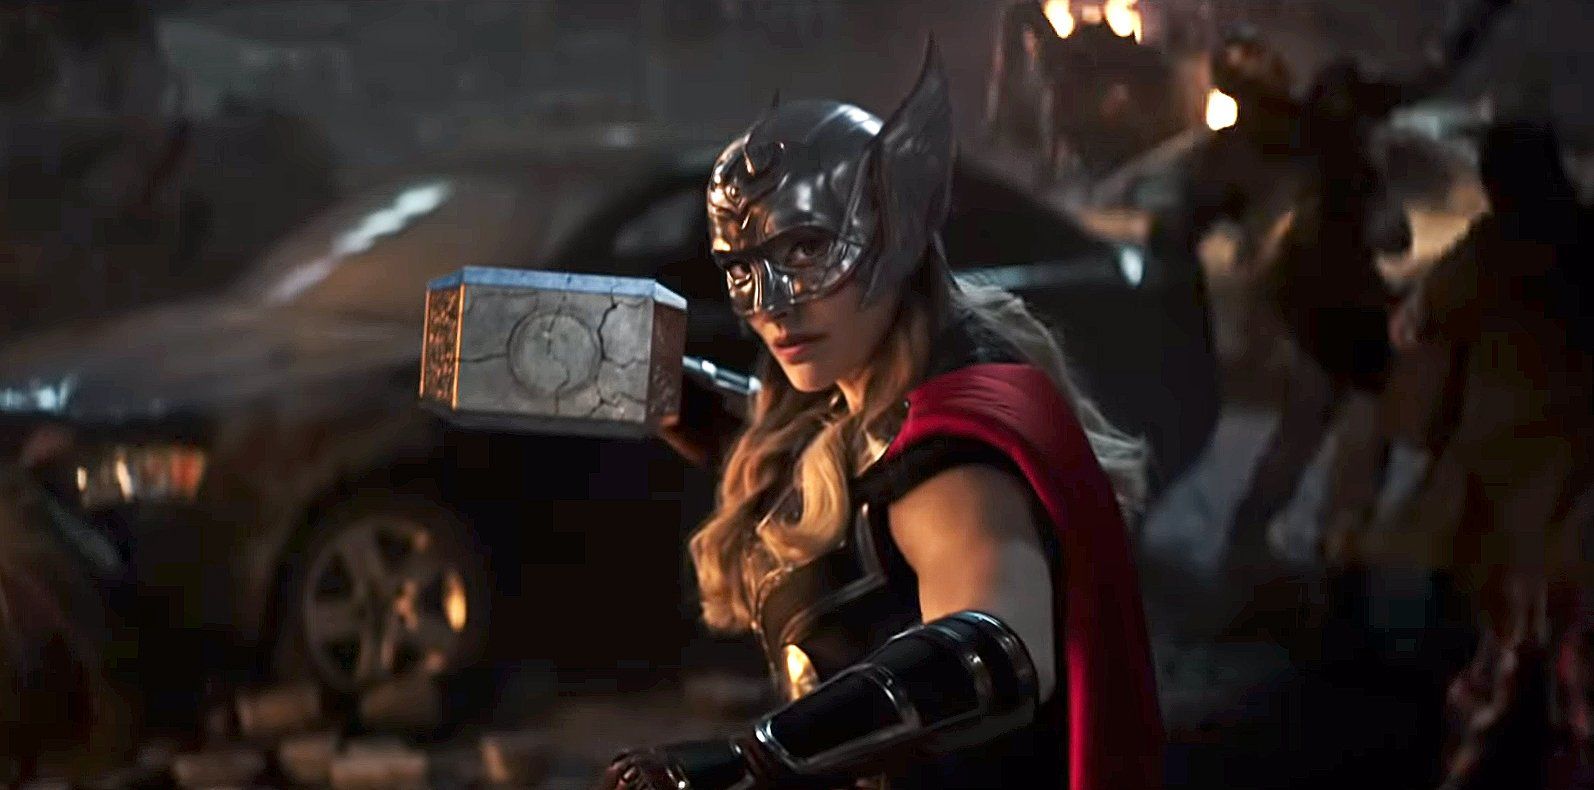 Natalie Portman unveils Mighty Thor poster from ‘Thor: Love and Thunder’